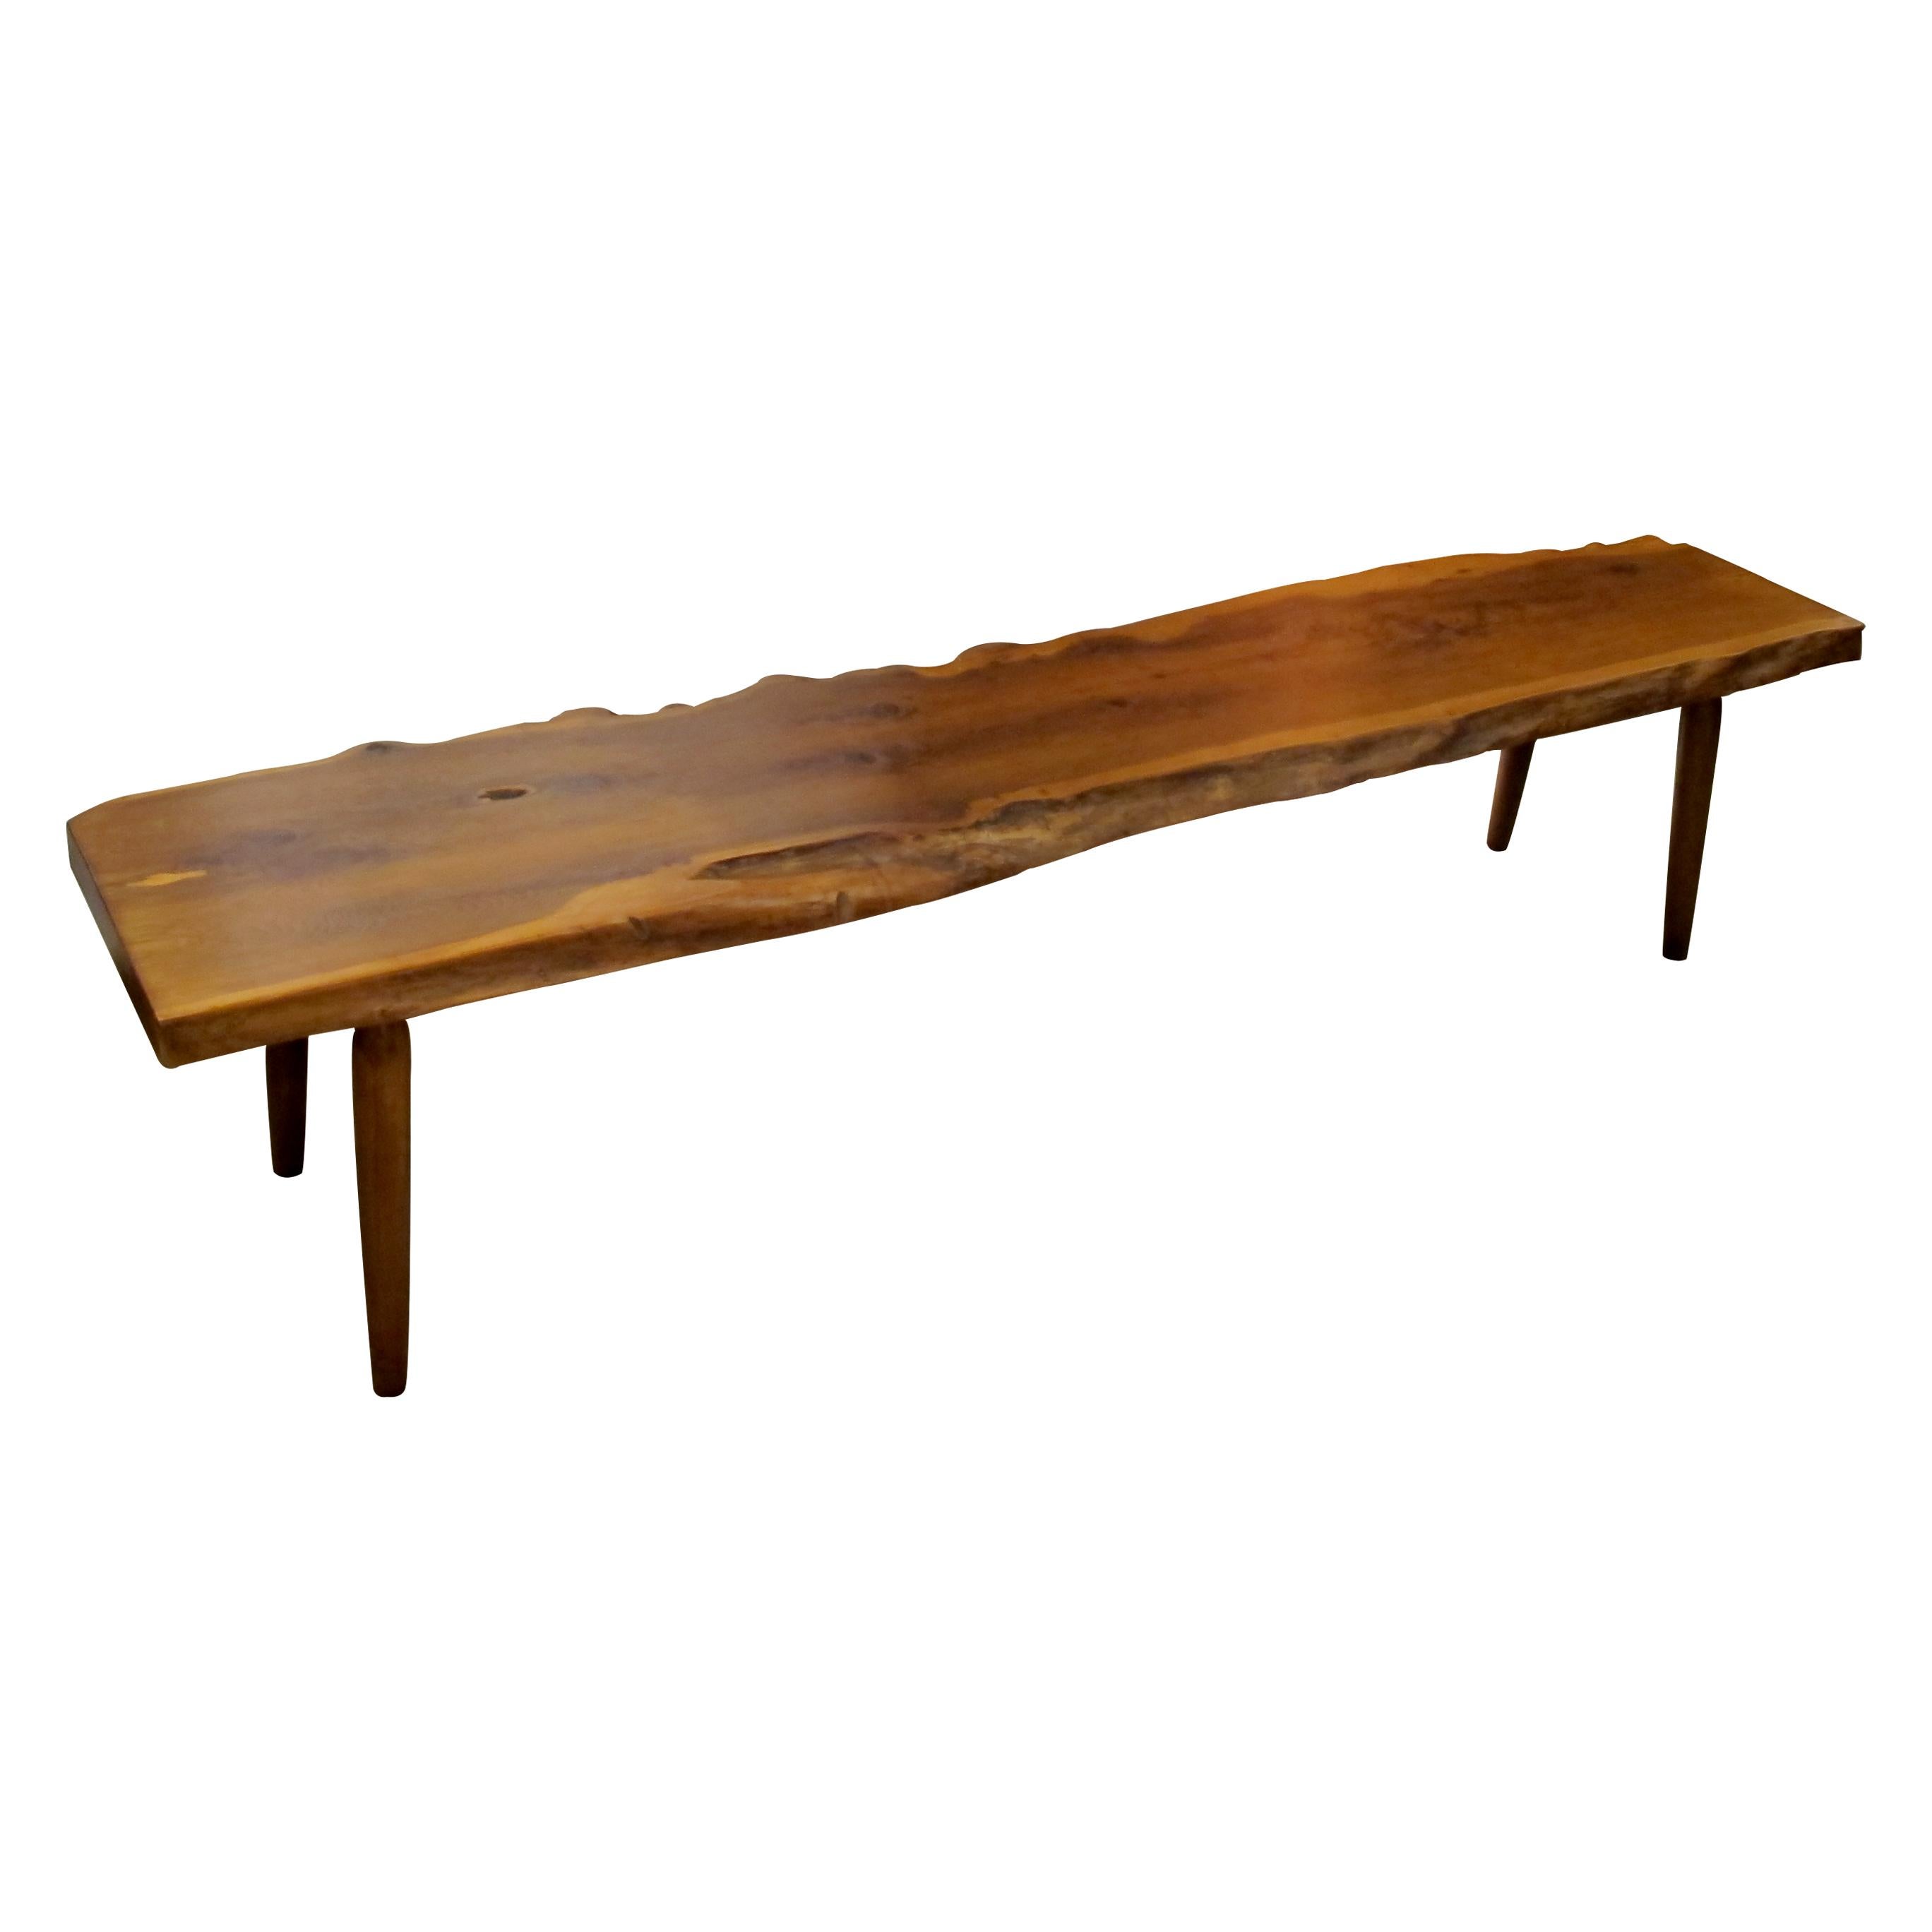 Reminiscent of some of George Nakashima's work this bench is attributed to Reynolds of Ludlow. Crafted with precision and care, the bench boasts a beautiful live edge design, showcasing the natural contours and imperfections and rich hues of the yew